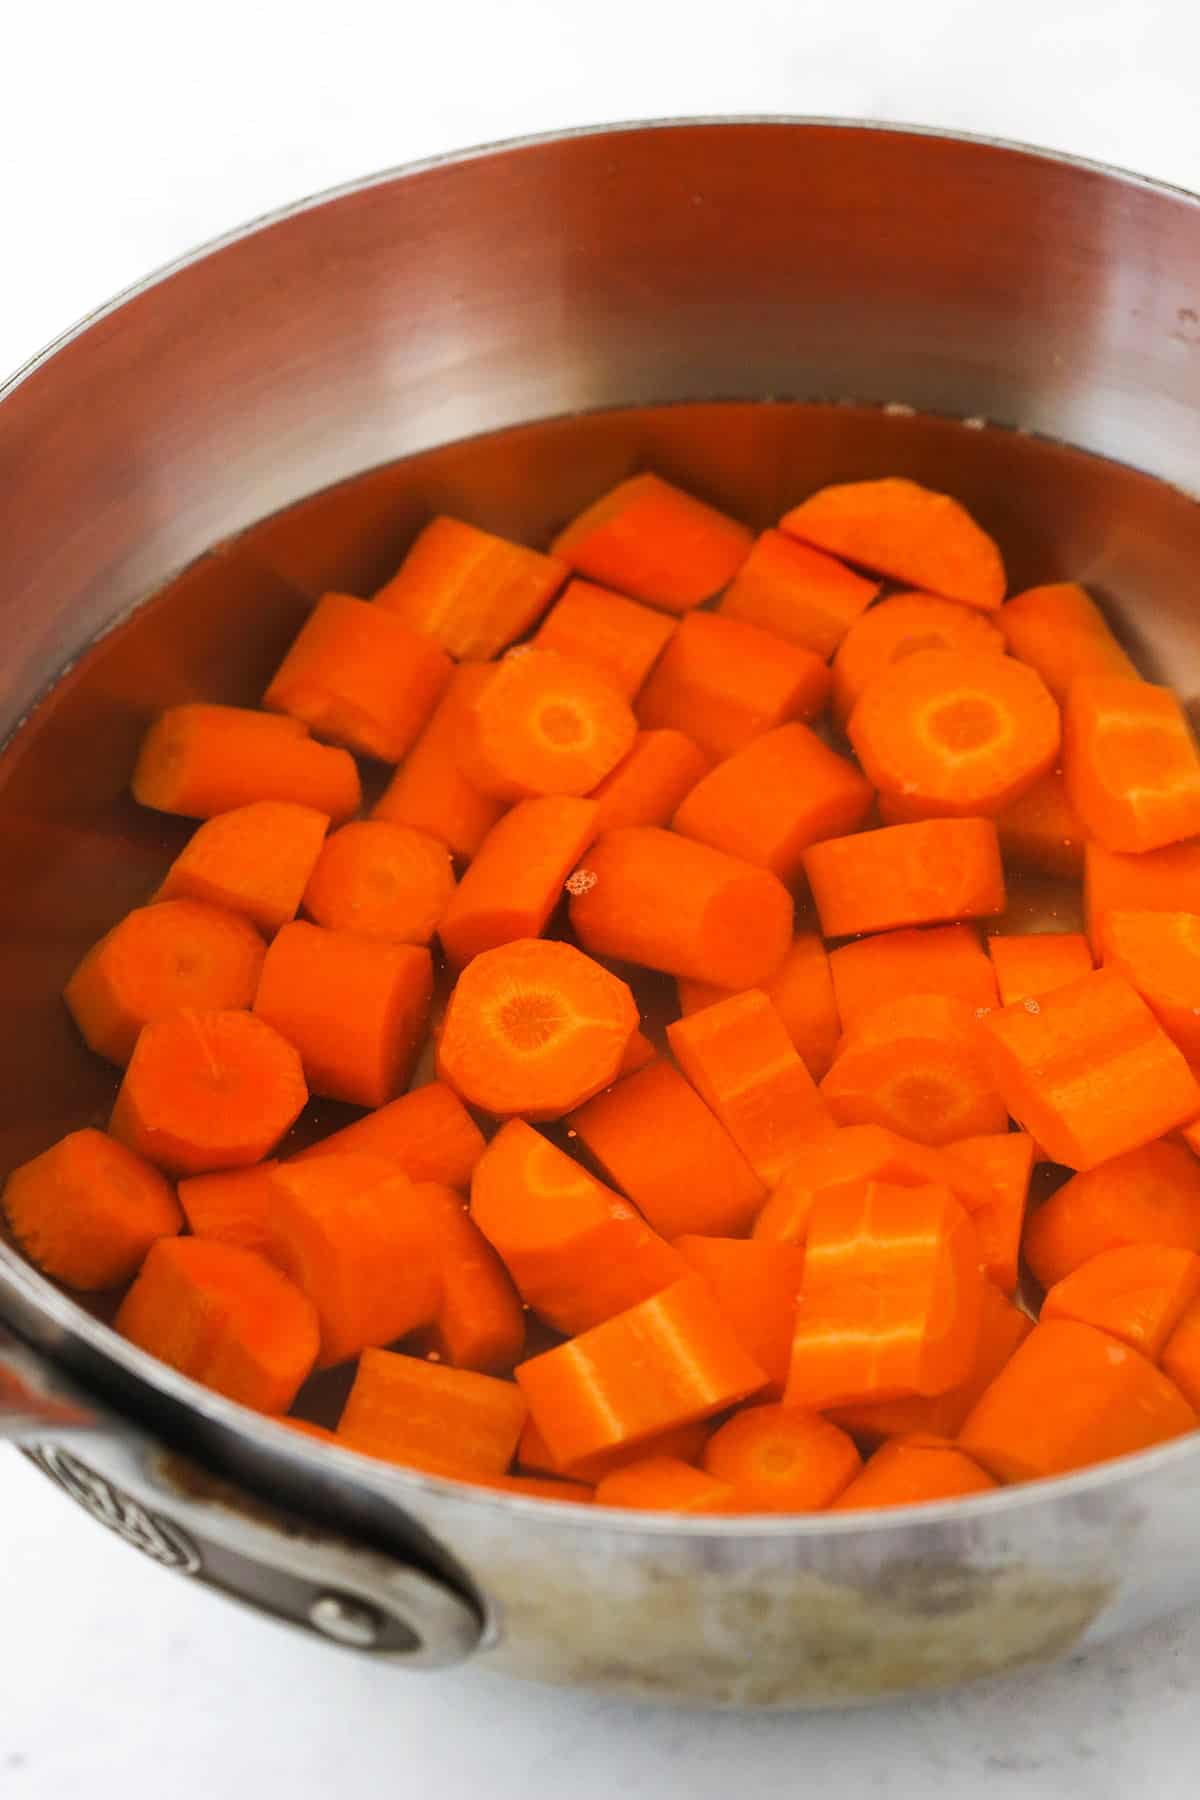 Carrot slices in a large metal bowl with enough water in it to fully submerge them